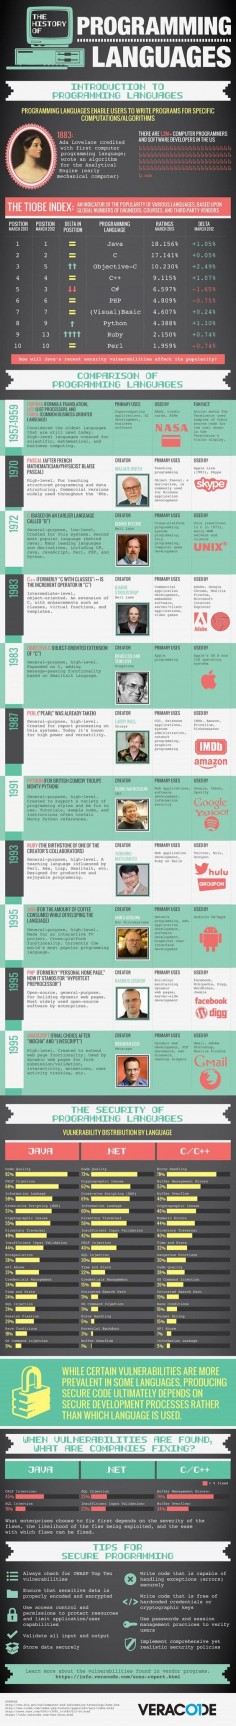 A brief history of computer programming languages #infographic